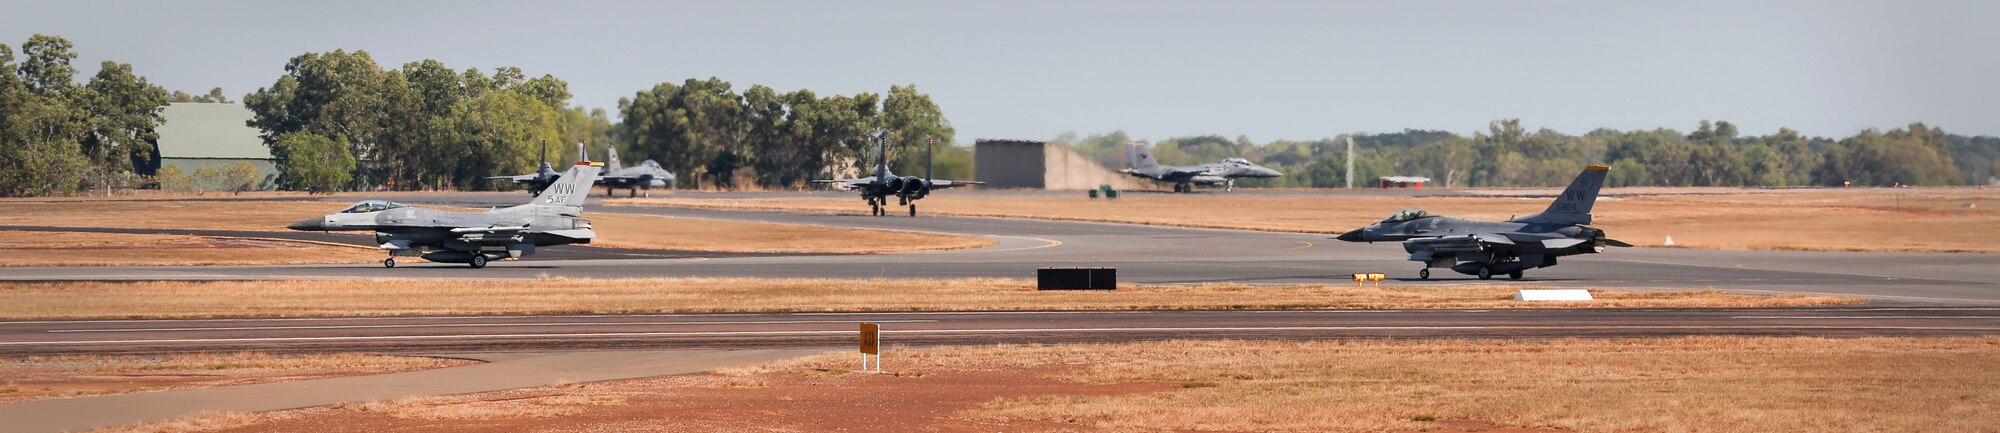 A U.S. Air Force F-16C aircraft and Republic of Singapore Air Force F-15 Eagle aircraft taxi during exercise PITCH BLACK 16 (PB16) at Royal Australian Air Force (RAAF) Base Darwin, Australia, Aug. 1, 2016. PB16 allows participant nations to exercise deployed units in the tasking, planning and execution of Offensive Counter Air and Offensive Air Support while utilizing one of the largest training airspace areas in the world.  The exercise is scheduled from July 29 to Aug.19, 2016. (Australian Defence Force photo by Cpl. Casey Gaul)